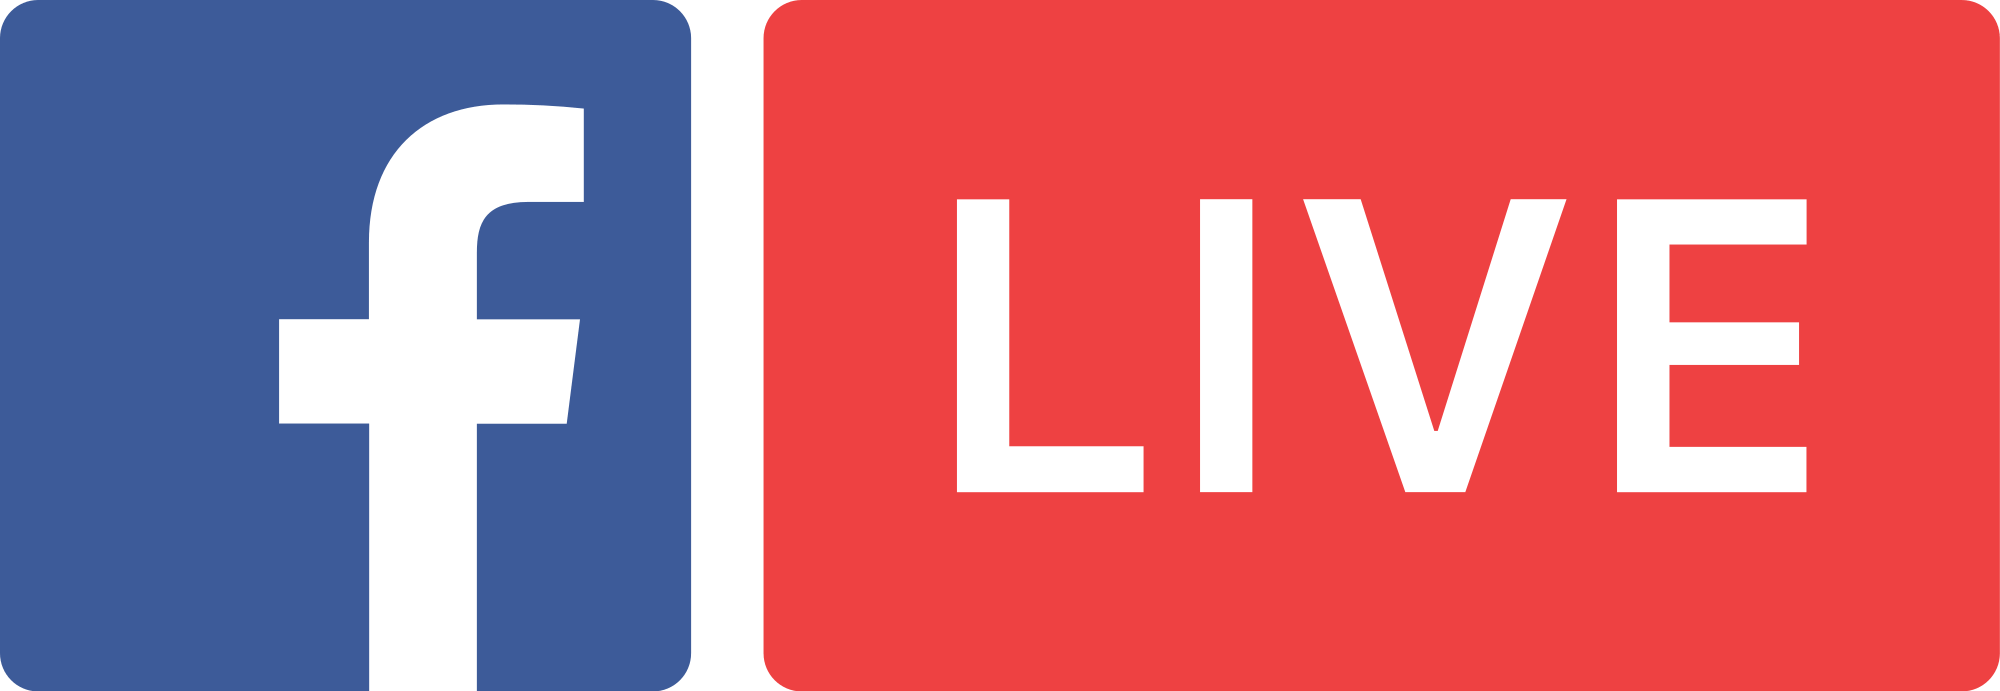 Red Live Logo - File:Facebook Live.svg - Wikimedia Commons